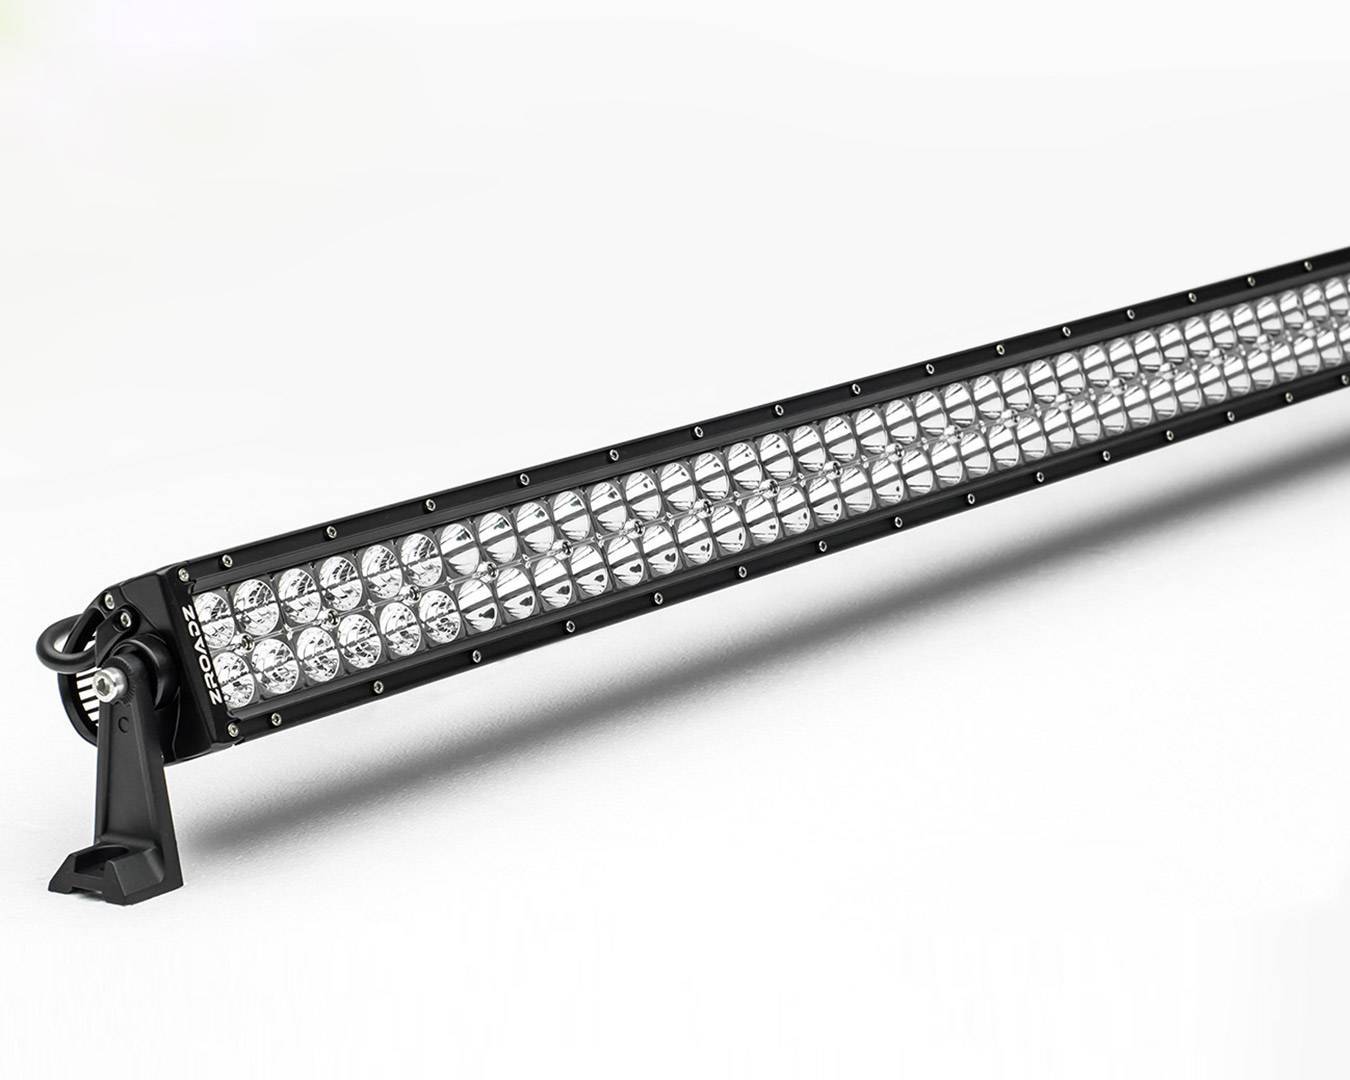 ZROADZ OFF ROAD PRODUCTS - 40 Inch LED Straight Double Row Light Bar - Part # Z30BC14W240